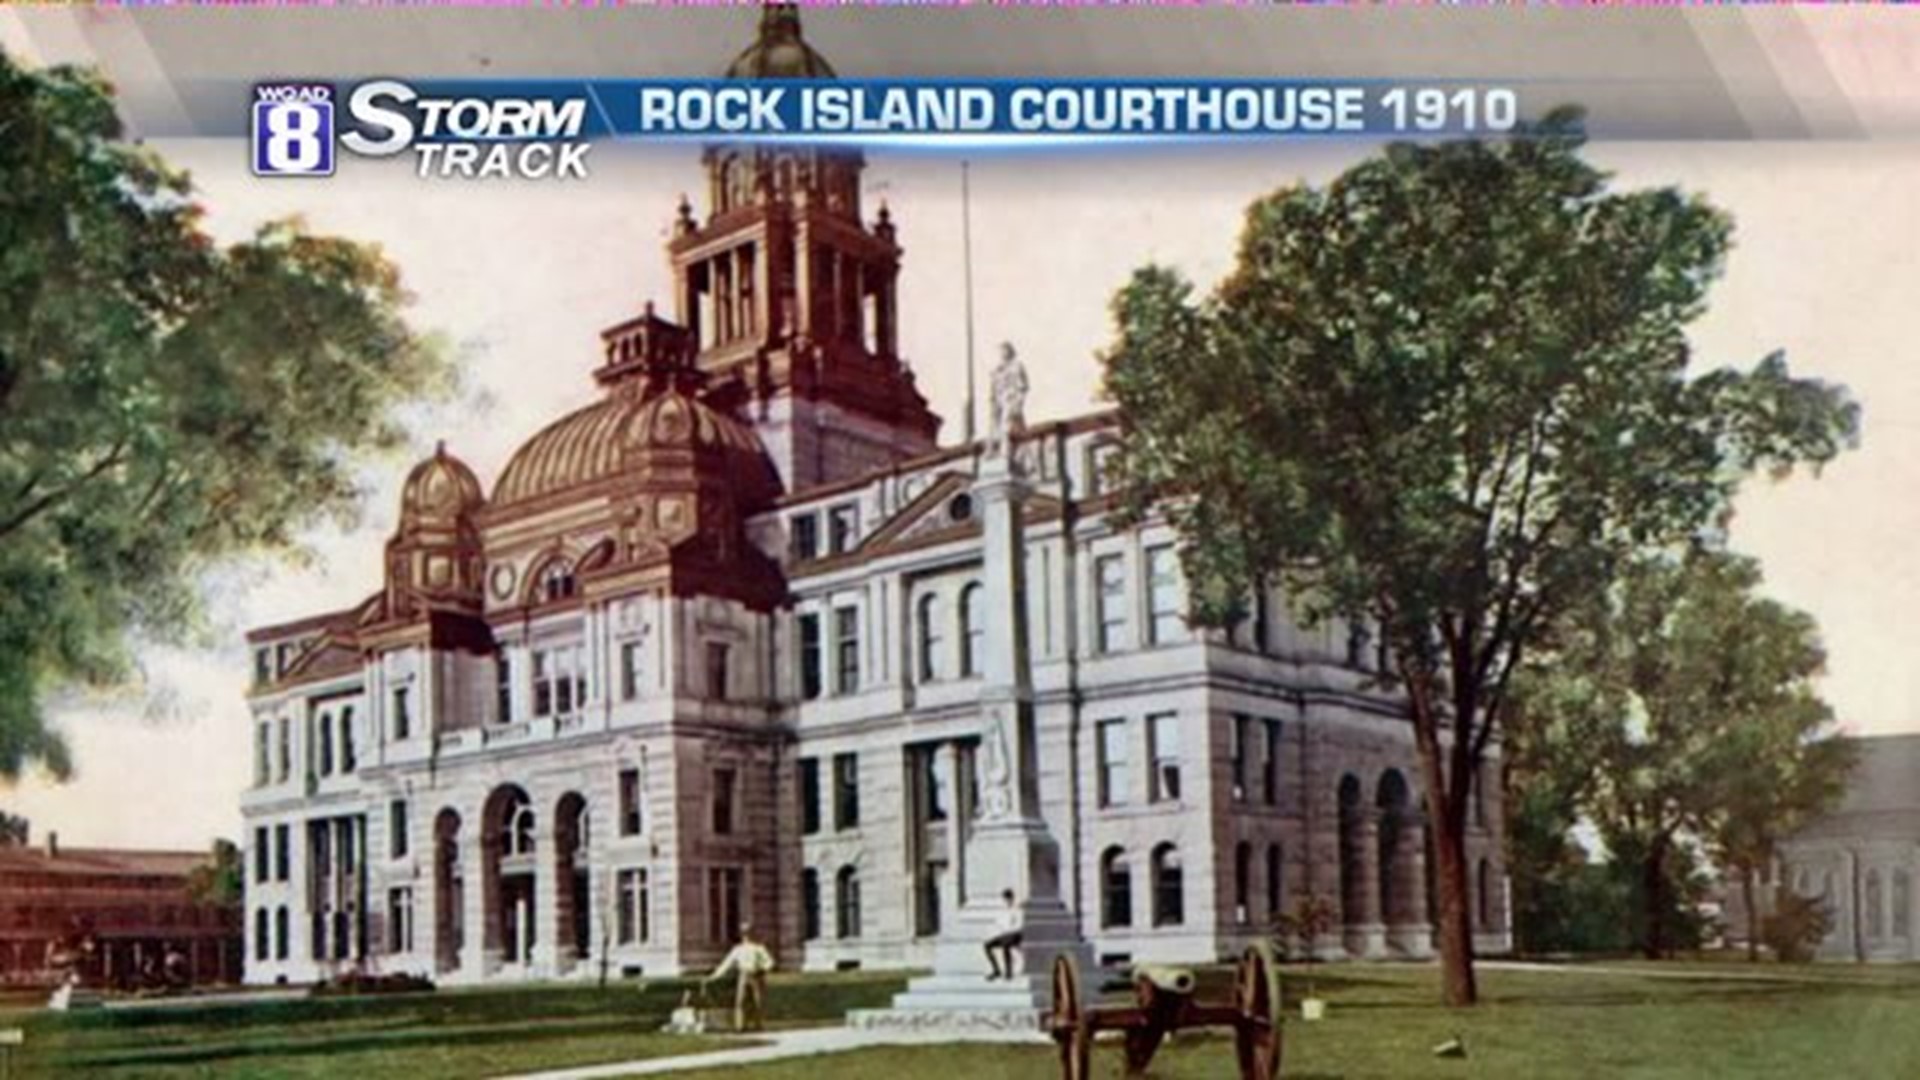 Is the Rock Island Courthouse missing something?